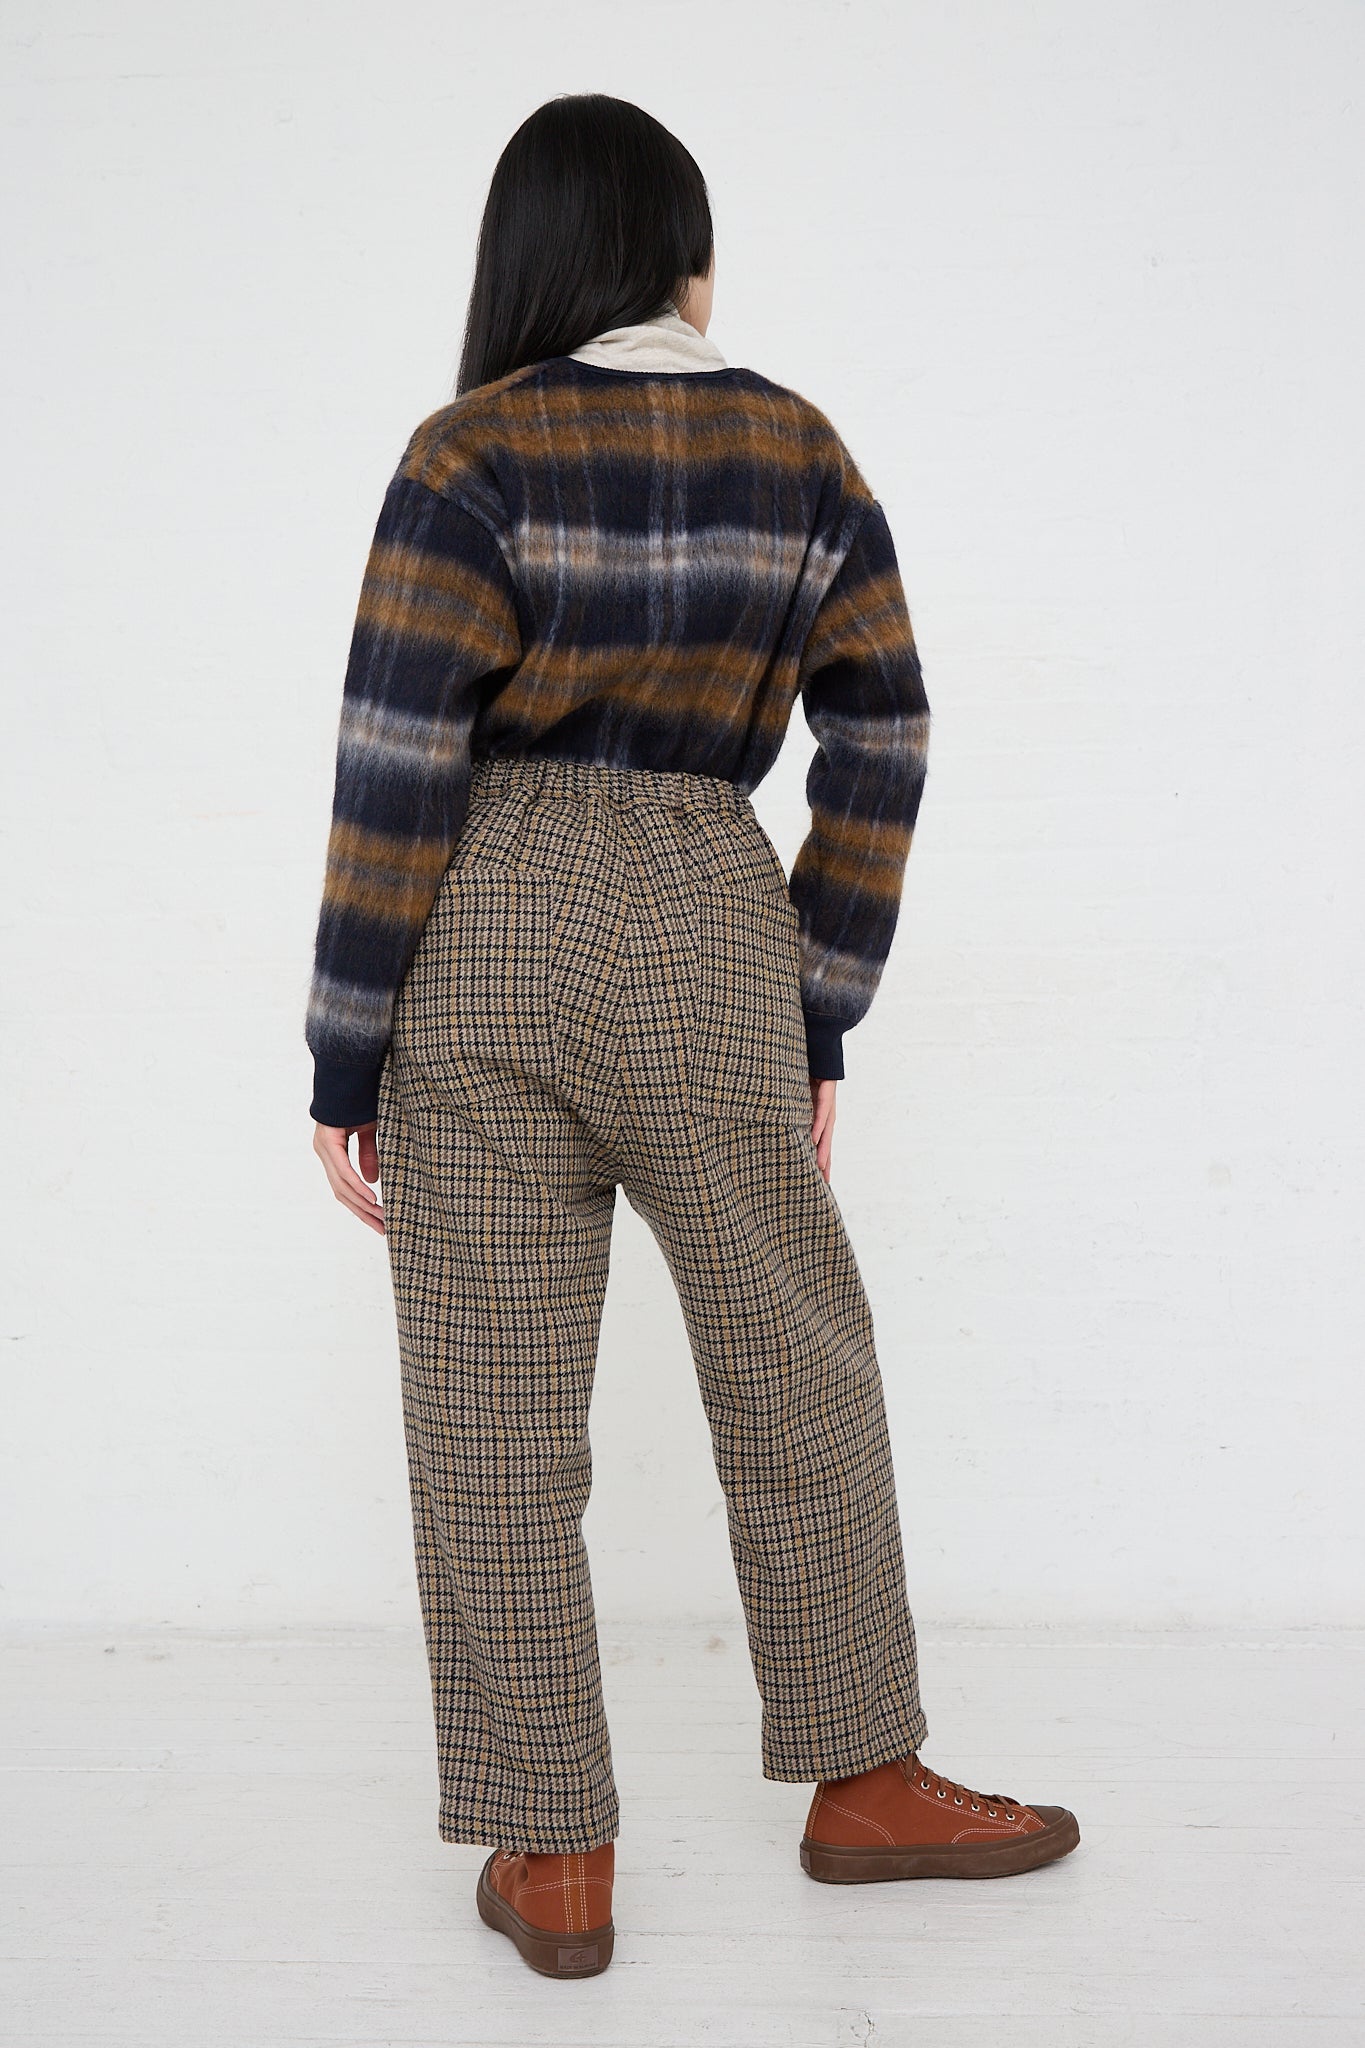 The back of a woman wearing Ichi's woven Pant in Mocha Check and check wool blend sweater. Full length.